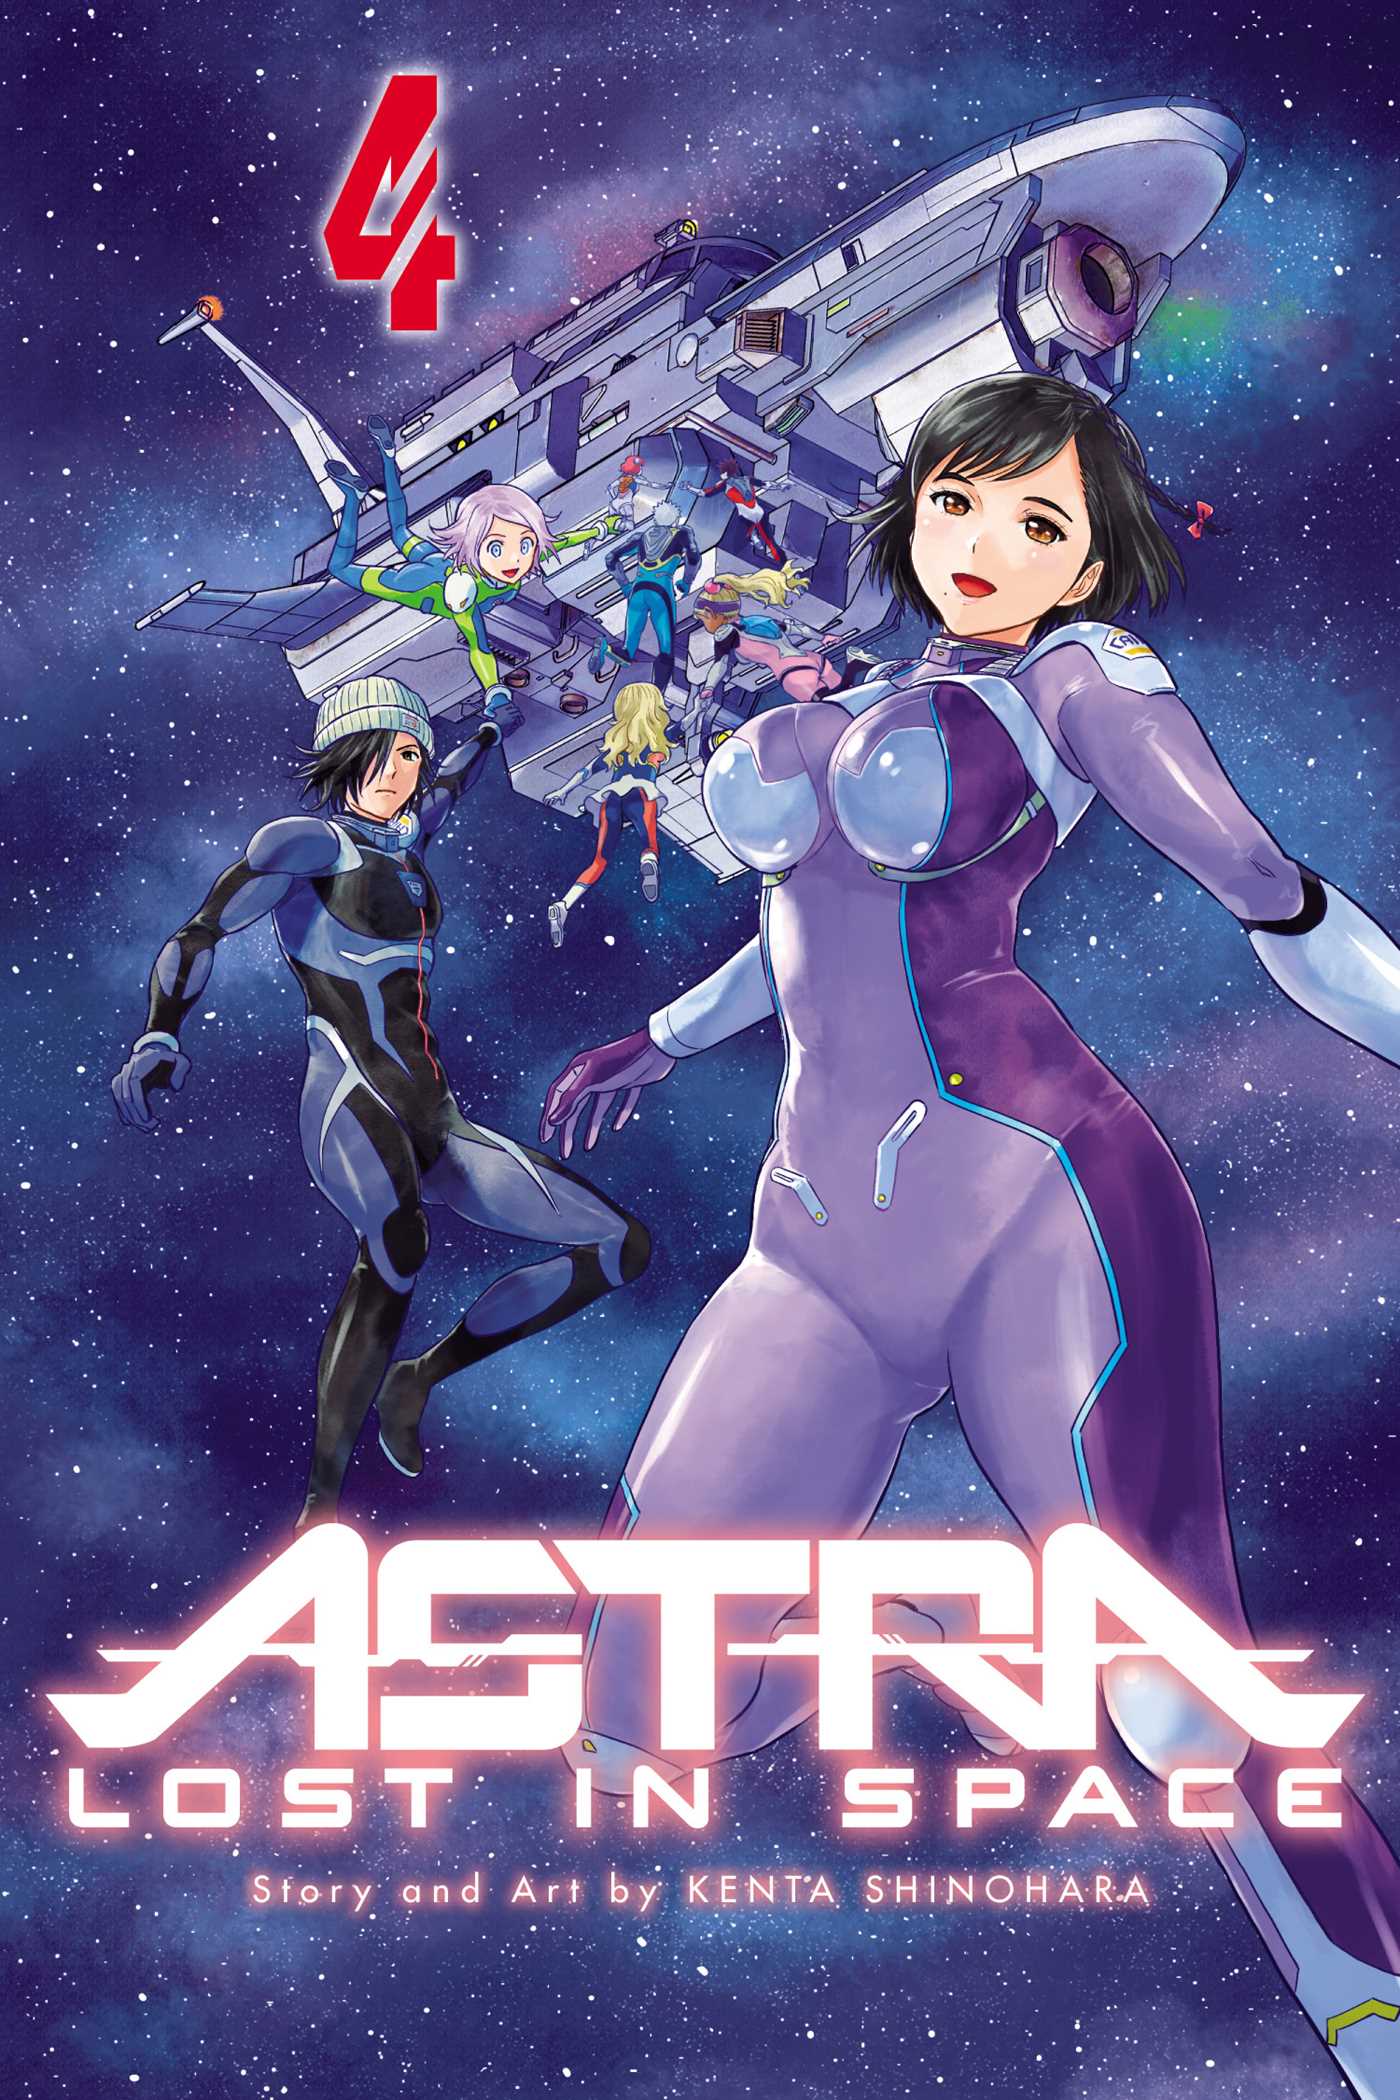 Astra Lost in Space Vol. 4 Review